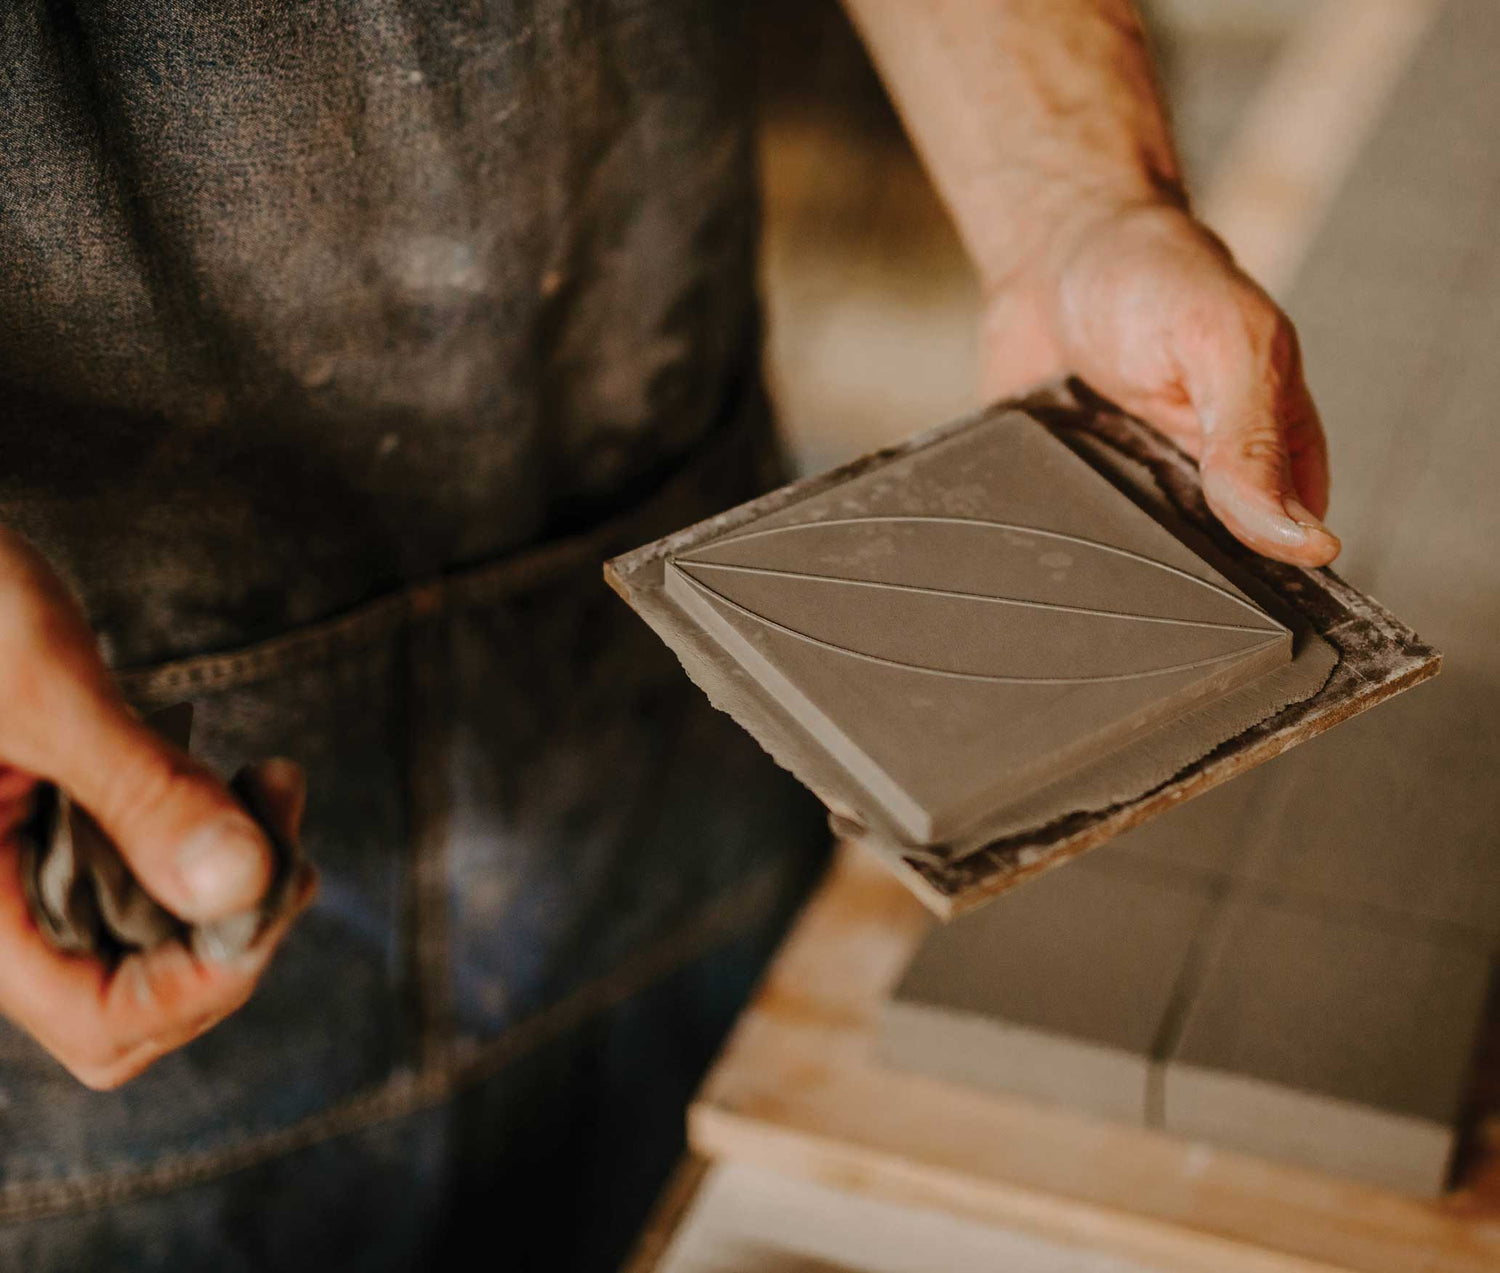 A Factory worker holds an unfinished tile in their hand